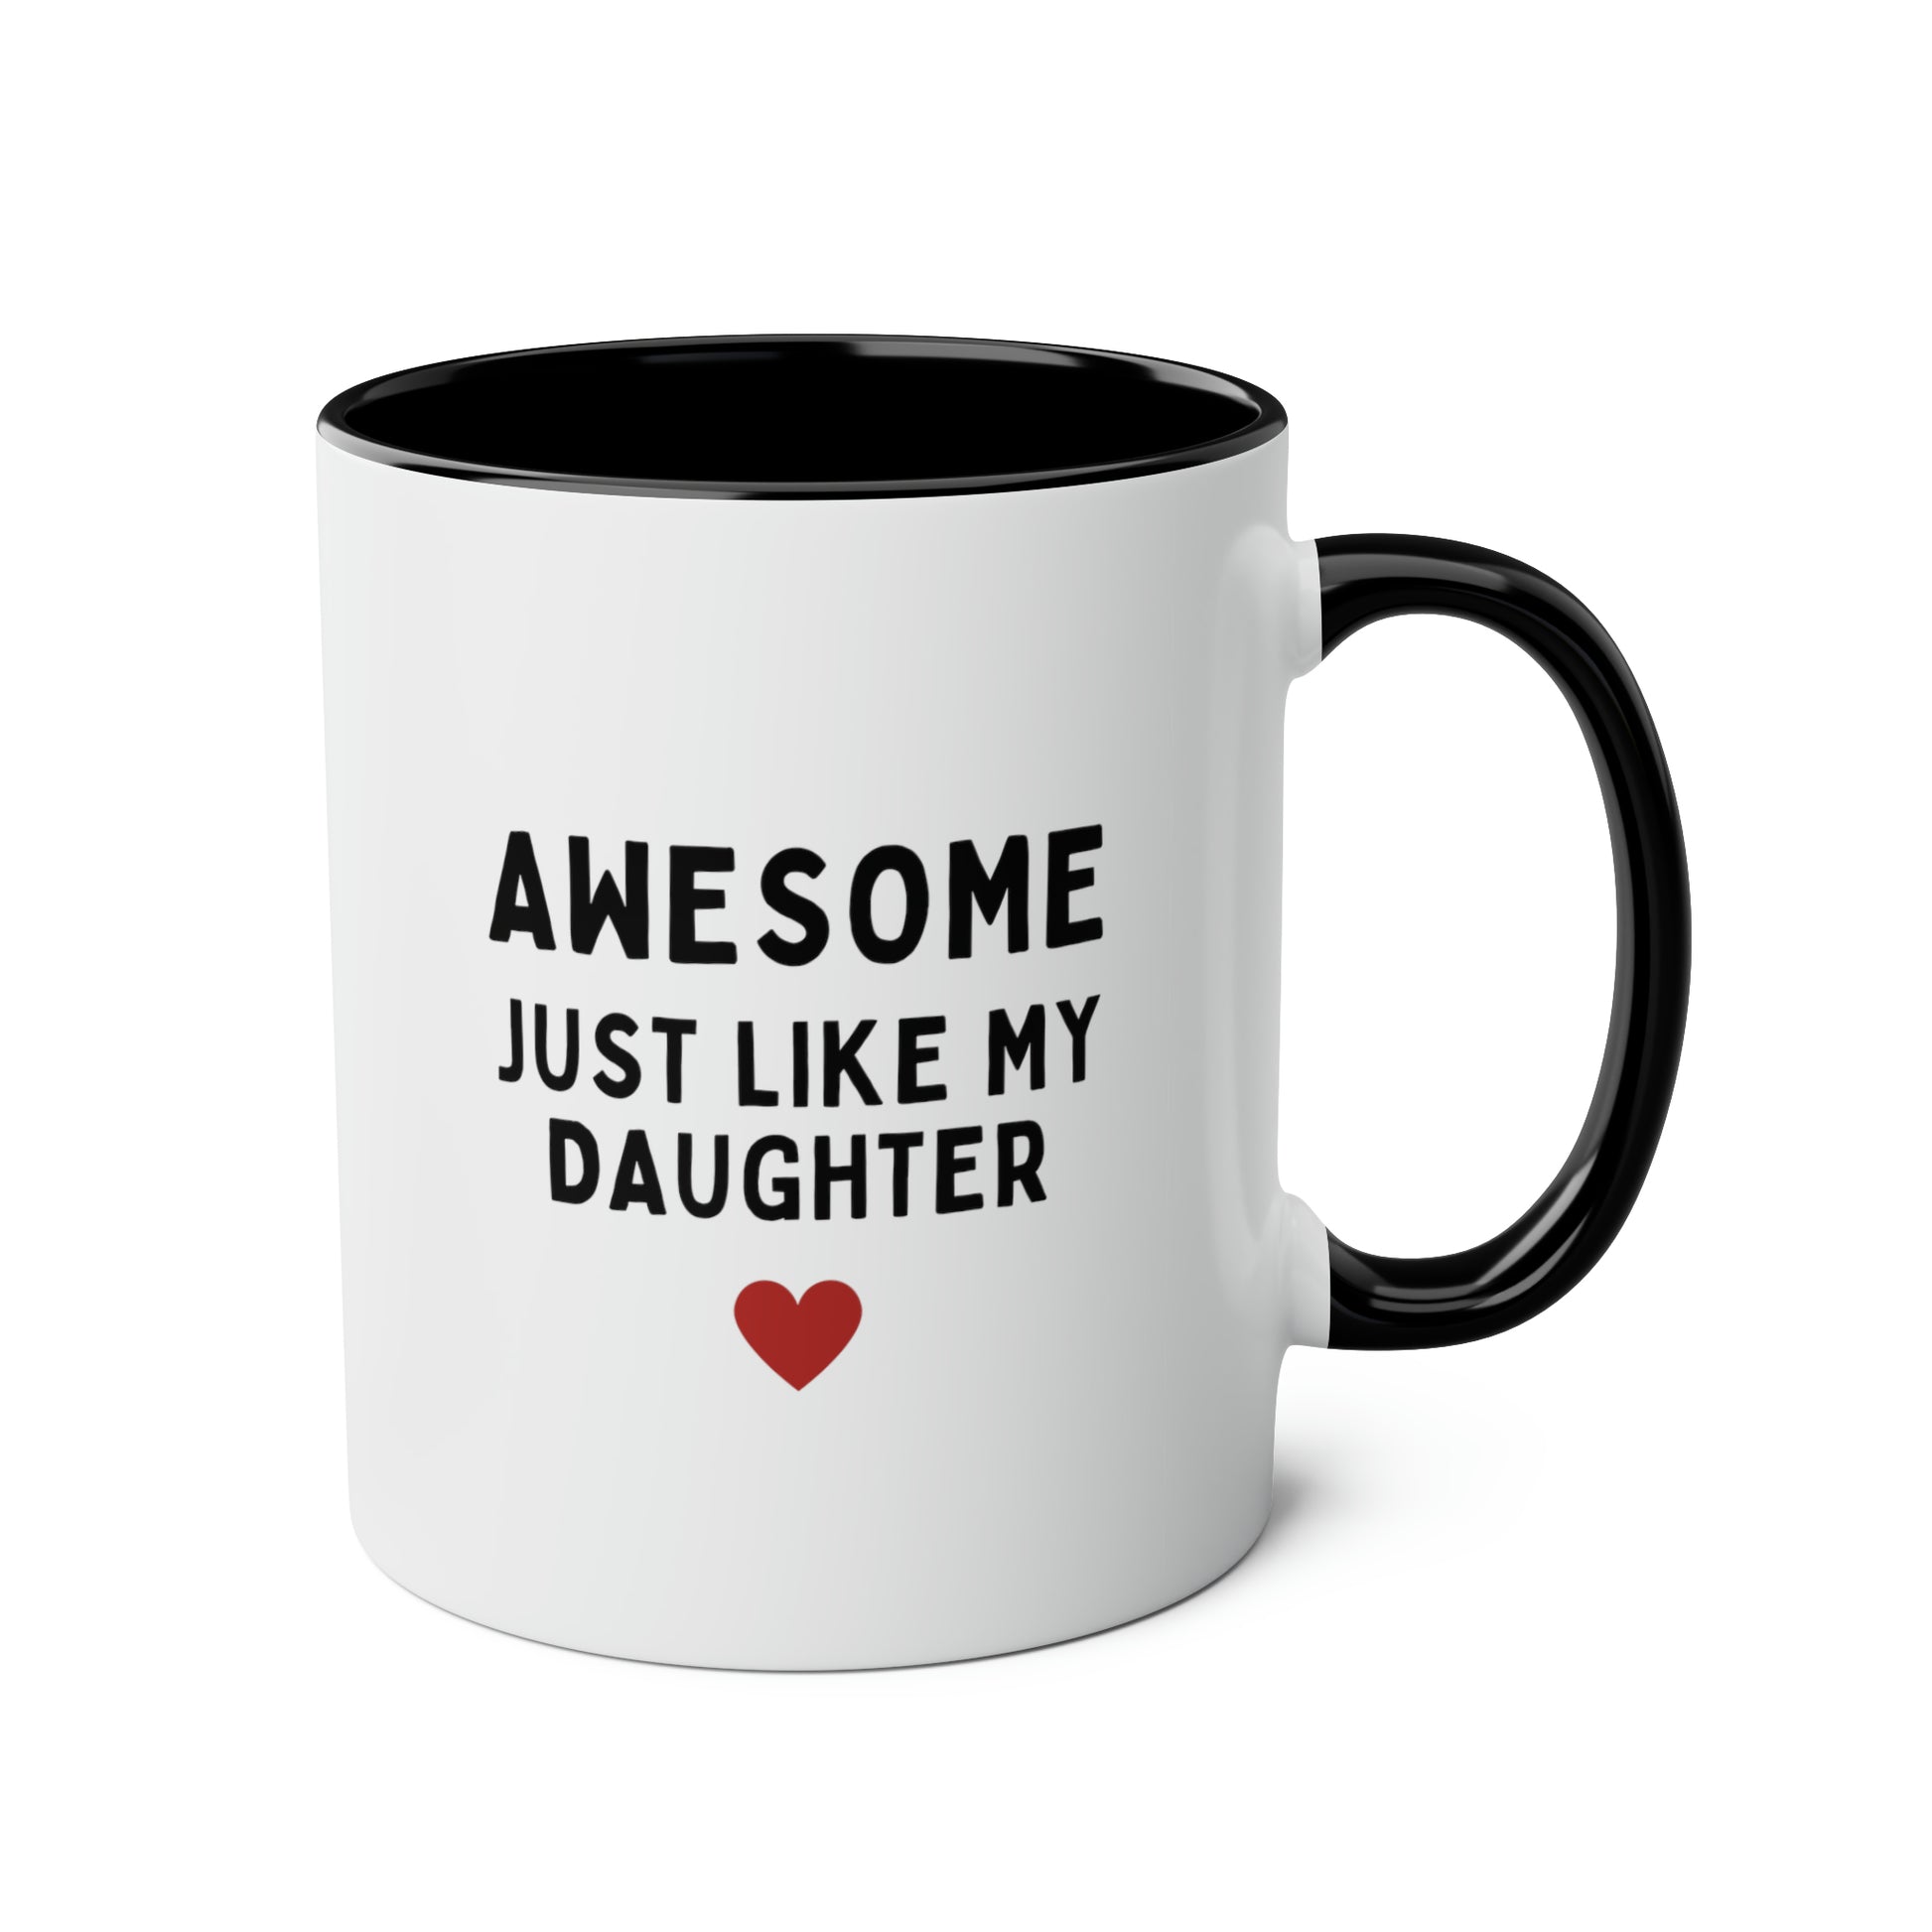 Awesome Just Like My Daughter 11oz white with black accent funny large coffee mug gift for husband daughter to dad fathers day cup waveywares wavey wares wavywares wavy wares